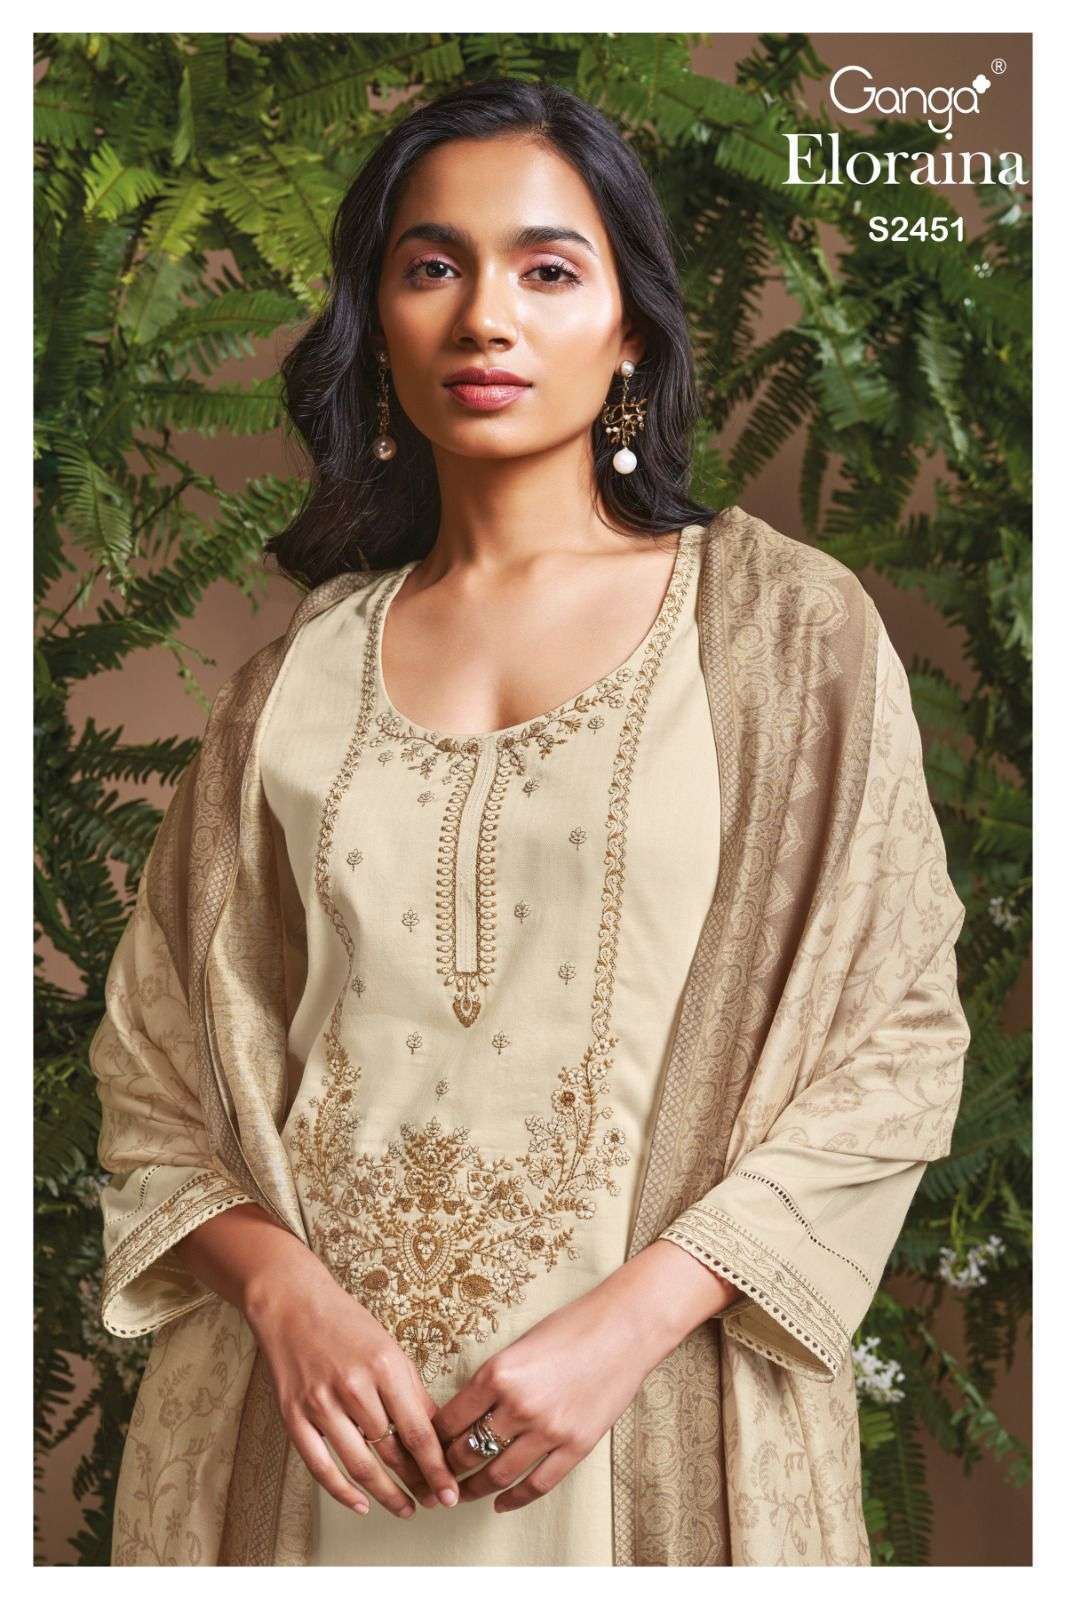 ganga eloraina 2451 cotton suits with neck embroidery work dress material collection at best rate 2024 03 27 12 37 08